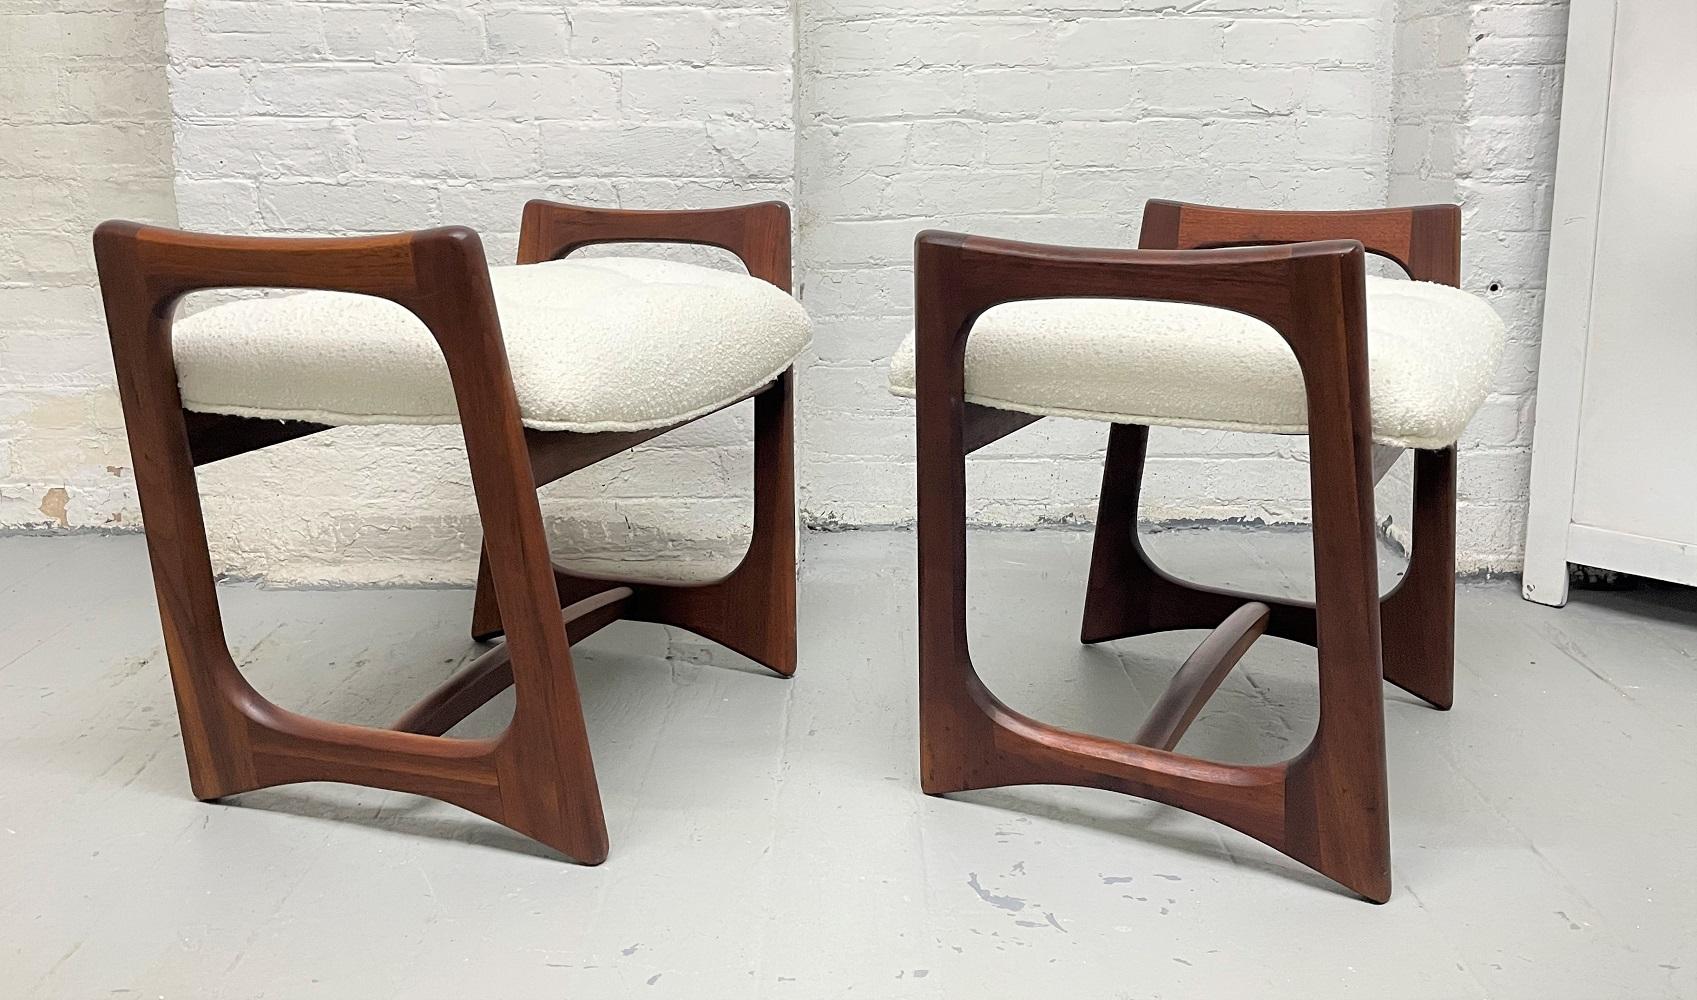 Three Adrian Pearsall Sculptural Stools / Benches in Bouclé In Good Condition For Sale In New York, NY